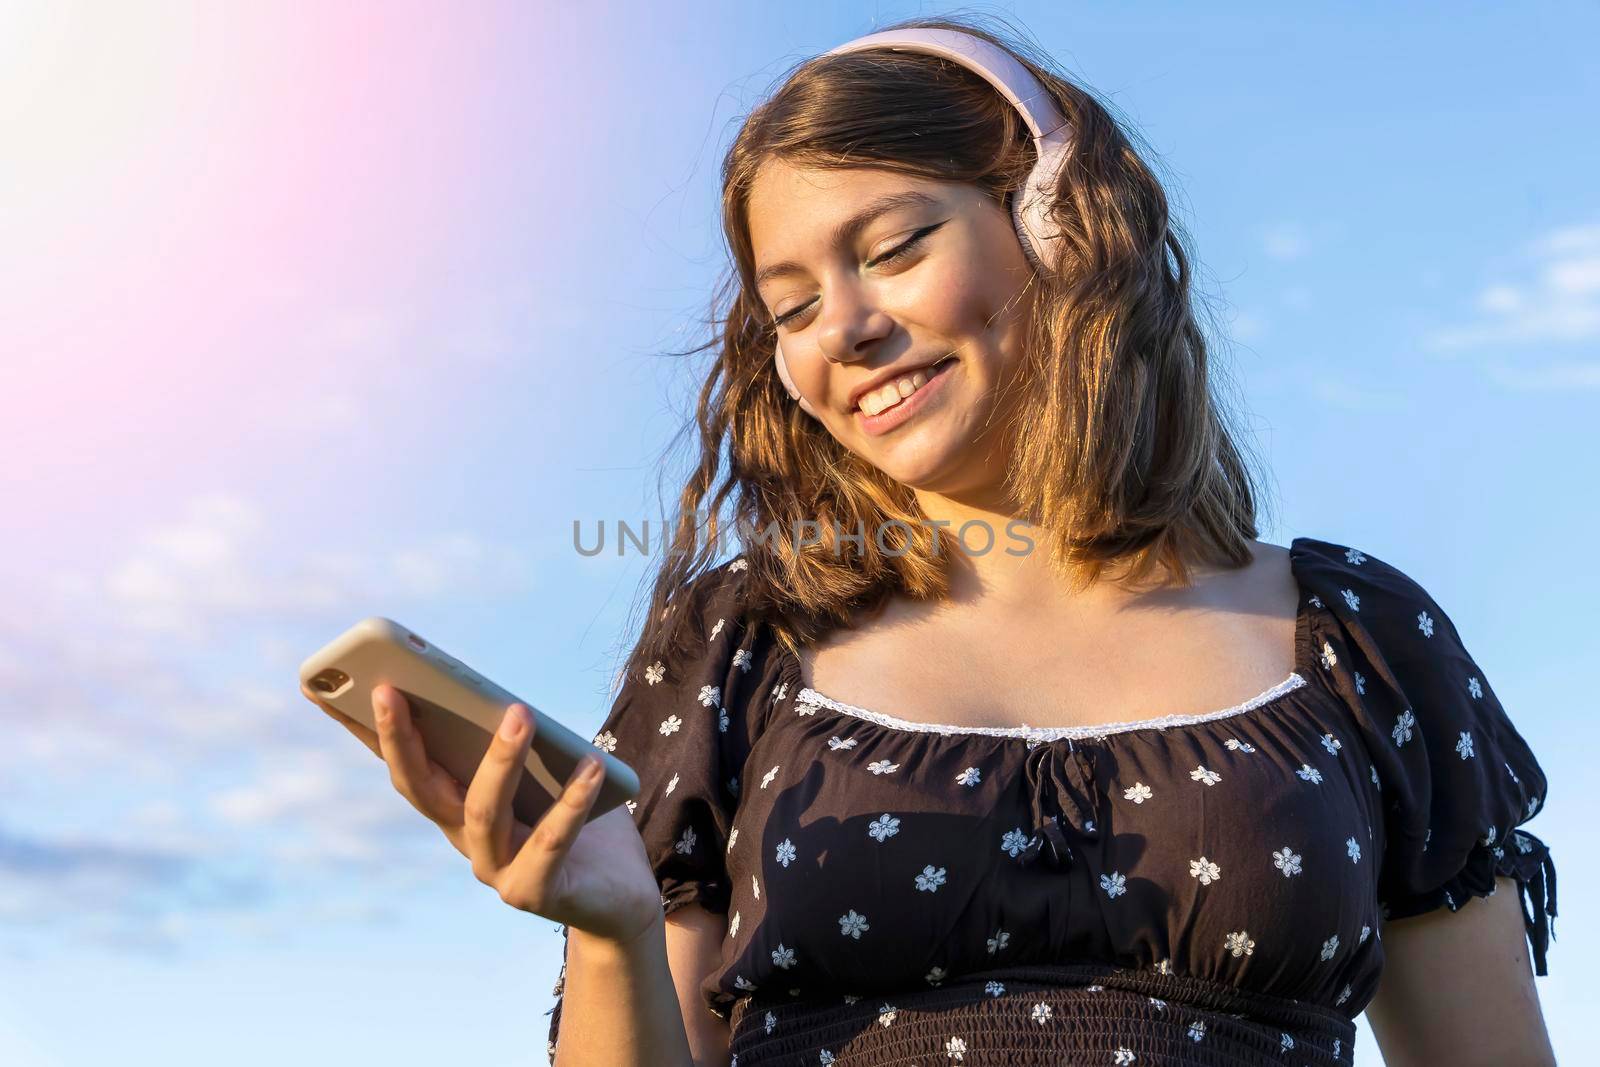 A contented smiling brunette in a dress listens to music on her smartphone through wireless headphones against a blue sky background